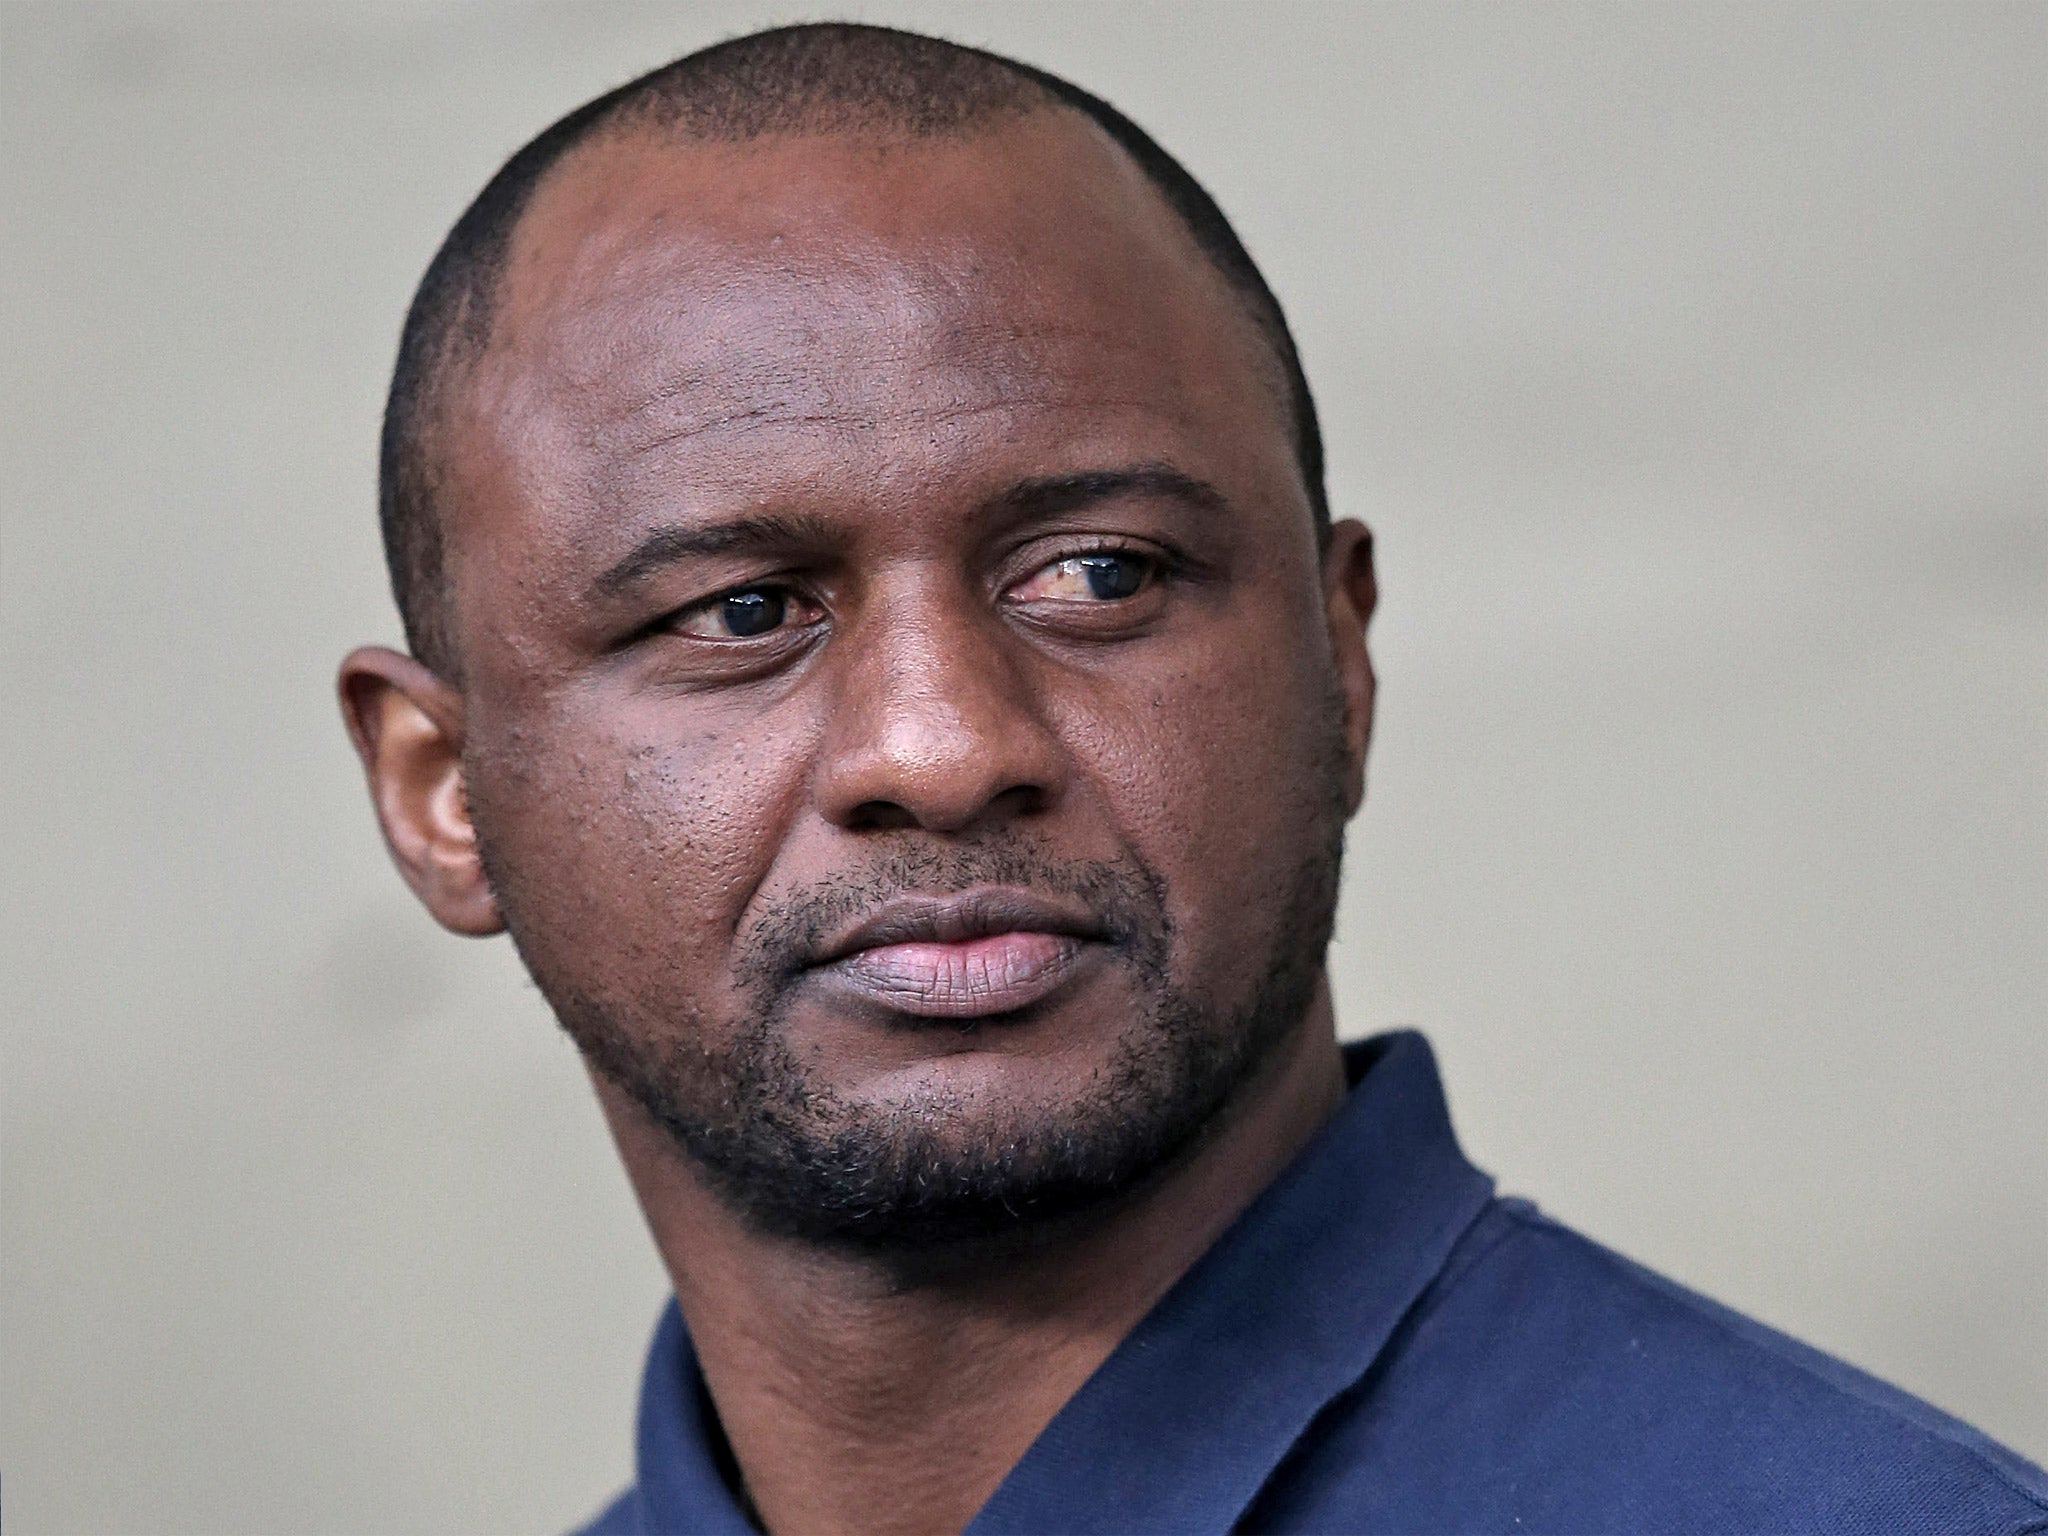 Patrick Vieira said Manchester City do not want to loan out young players but use them in a B team